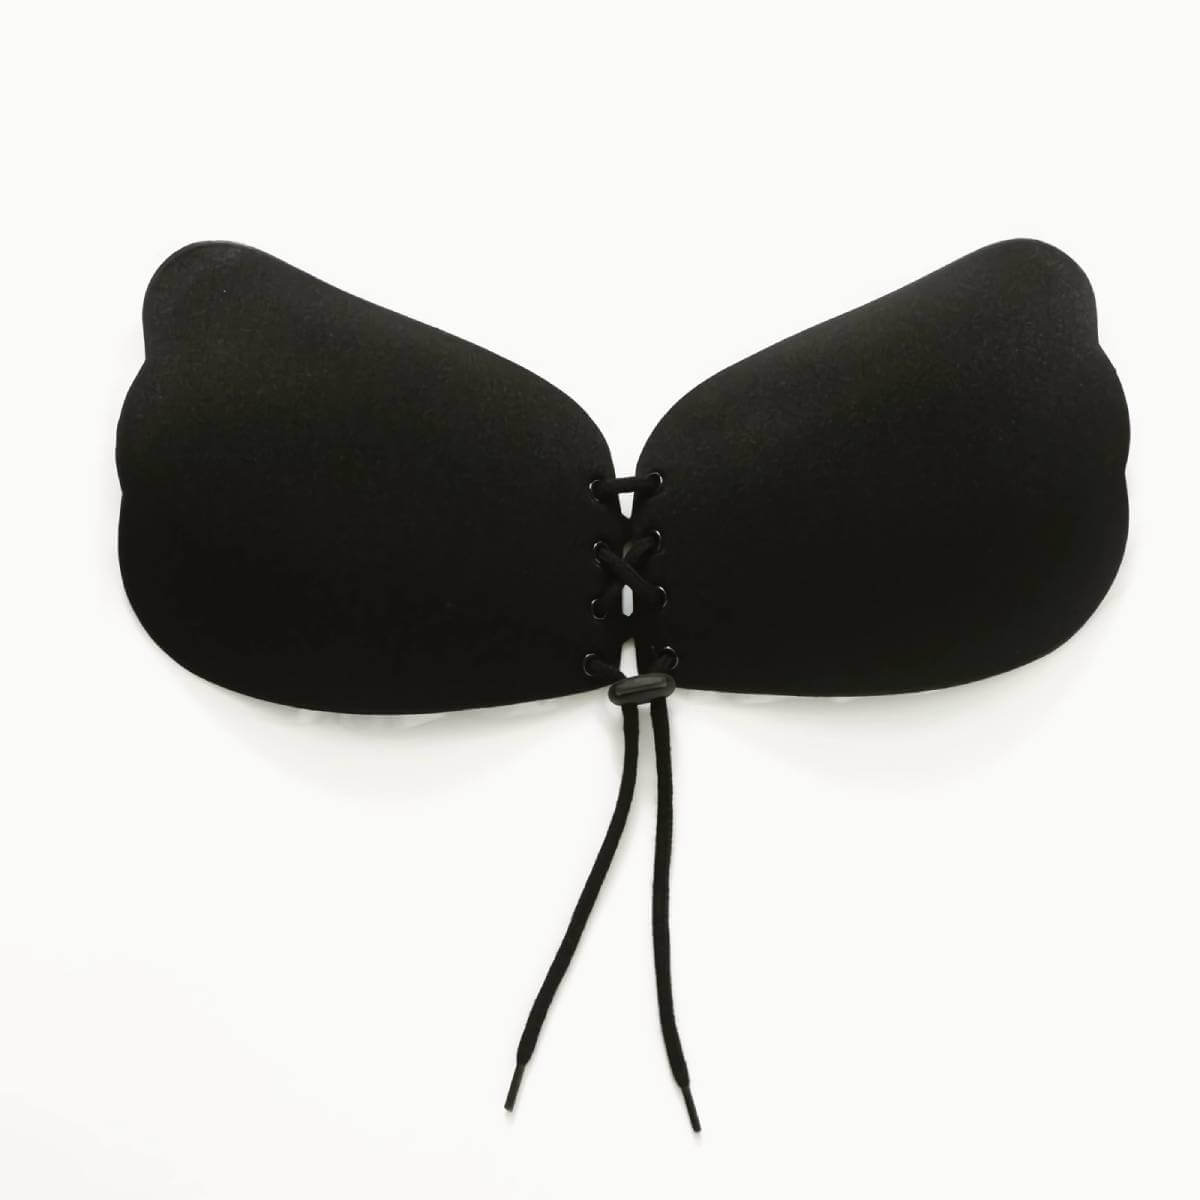 Front Closure Adhesive Strapless Bra A-F Cup